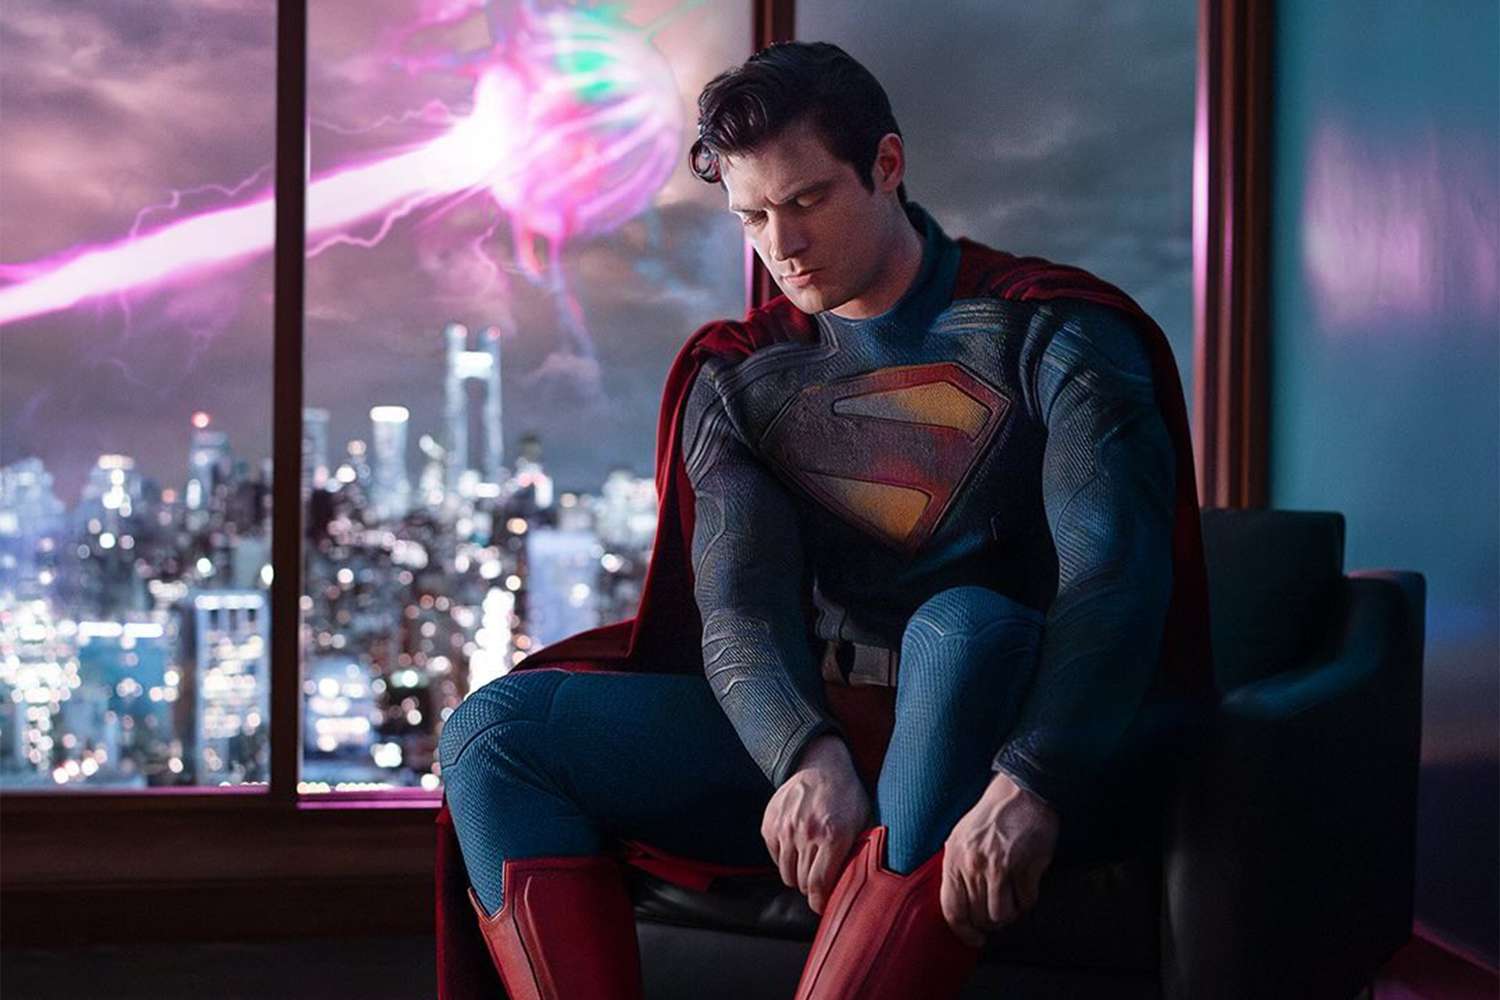 Watch David Korenwet as the Man of Steel in a new look from the 2025 superhero film